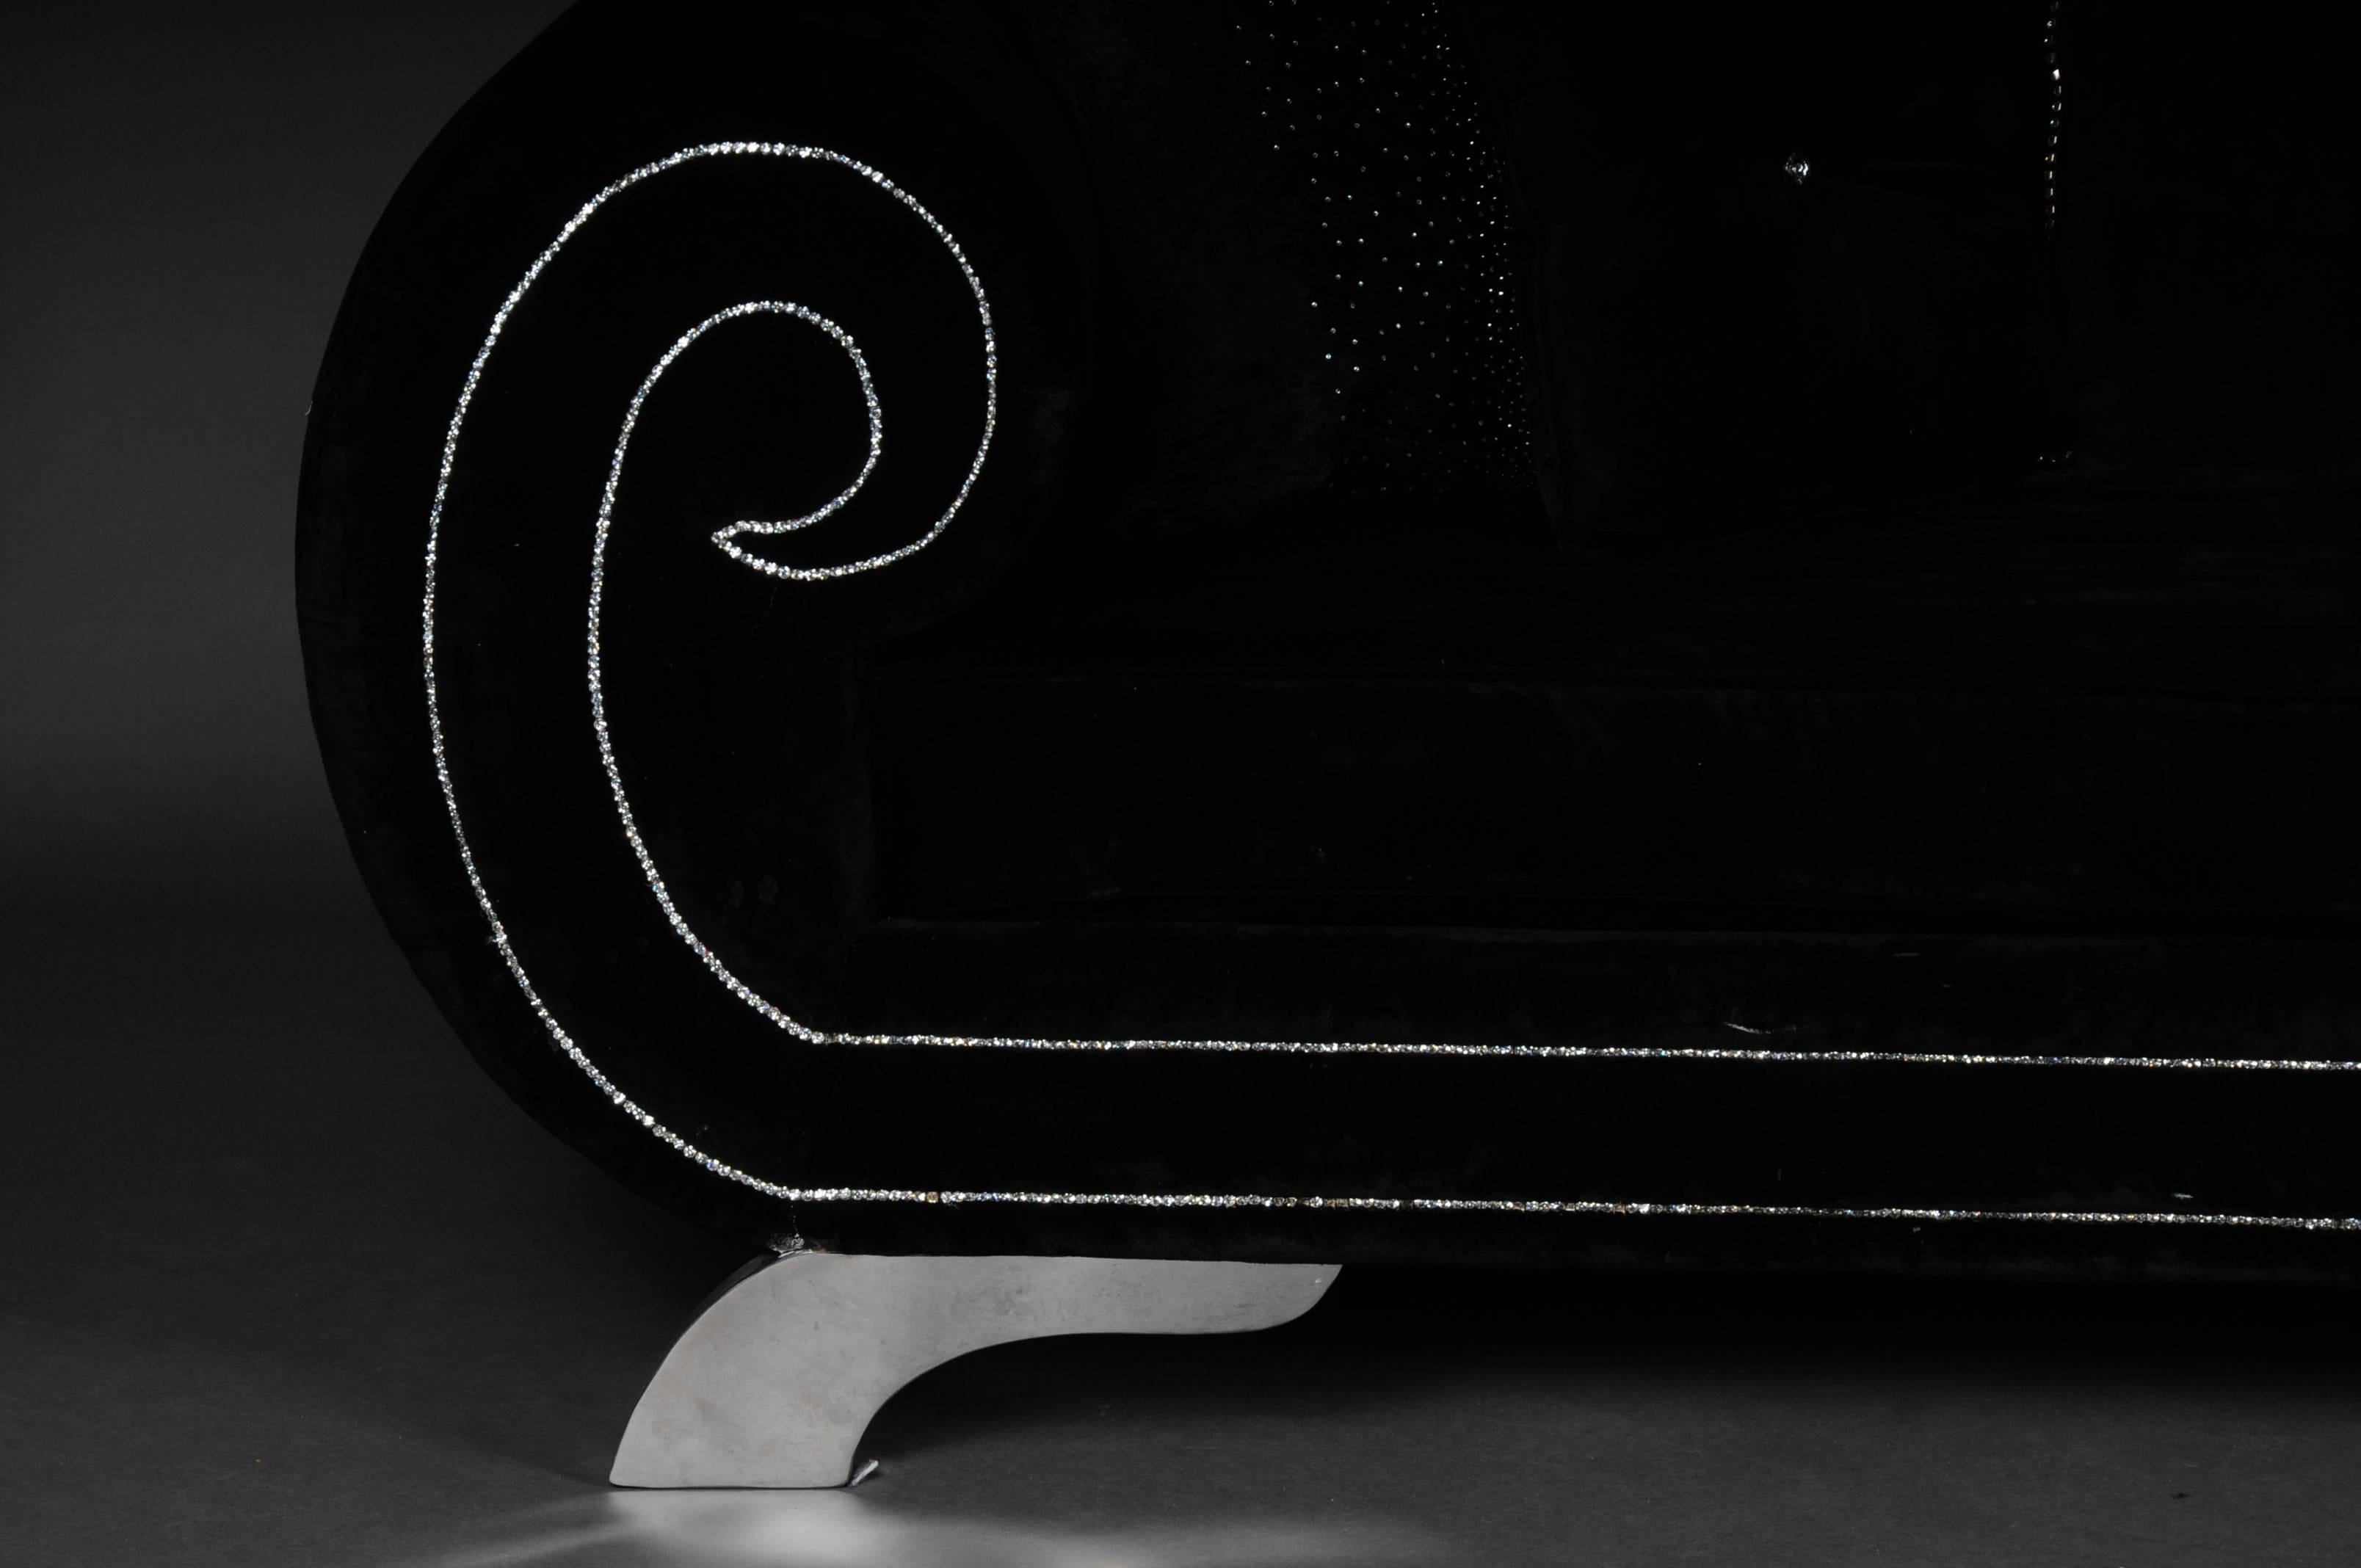 Unique Luxurious designer sofa, rhinestones, black velvet. Highlight

Unusual and high-quality sofa in black velvet. Body refined with rhinestones. Sofa stands on four chrome feet.

Very modern, comfortable and an absolute eyecatcher.
Very